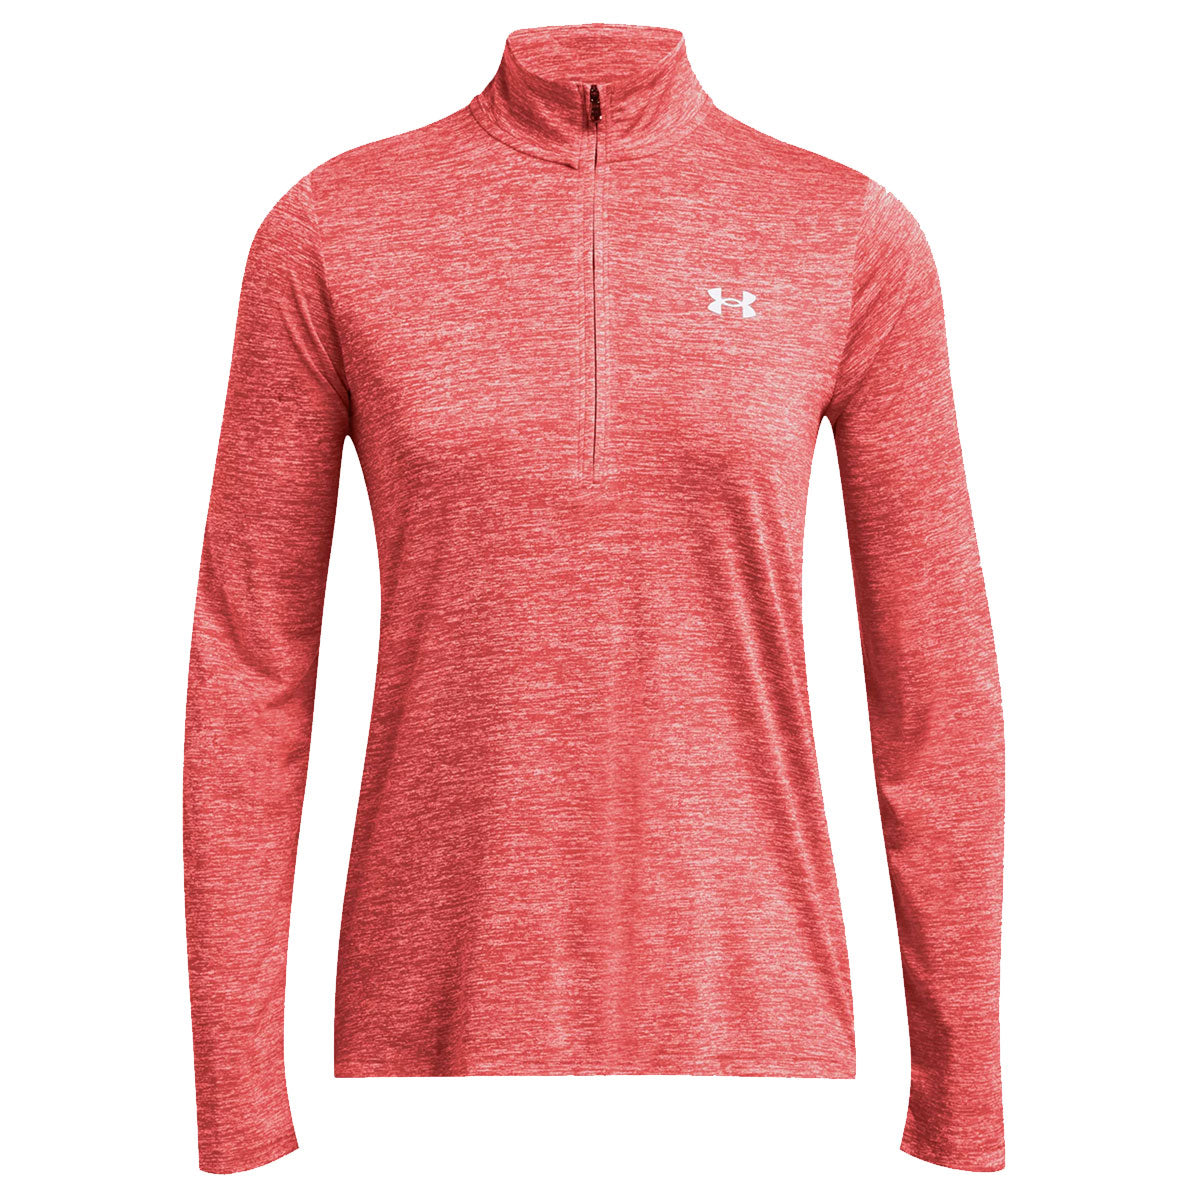 Under Armour Tech 1/2 Zip Twist Top - Womens - Red Solstice/White